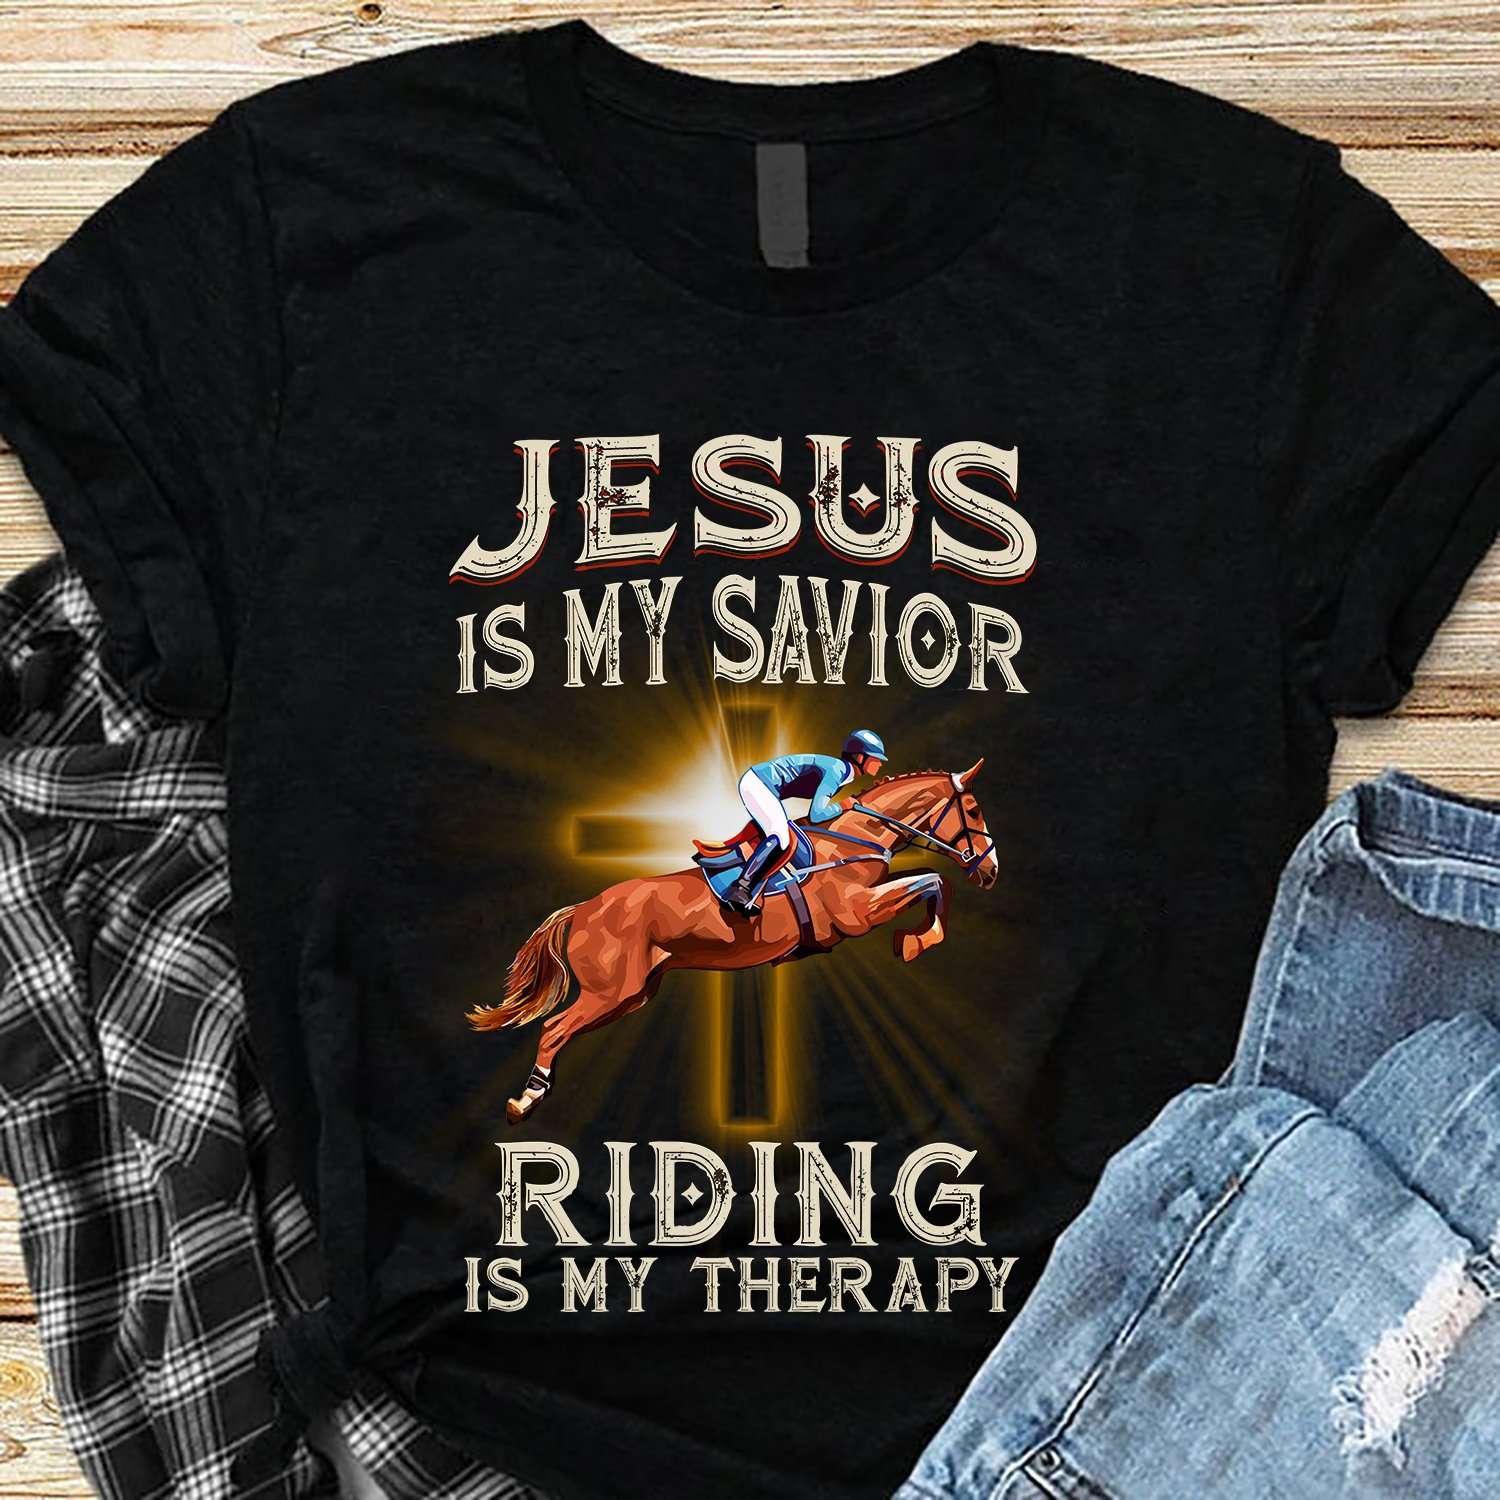 Jesus is my savior, riding is my therapy - Horse riding therapy, Jesus and riding